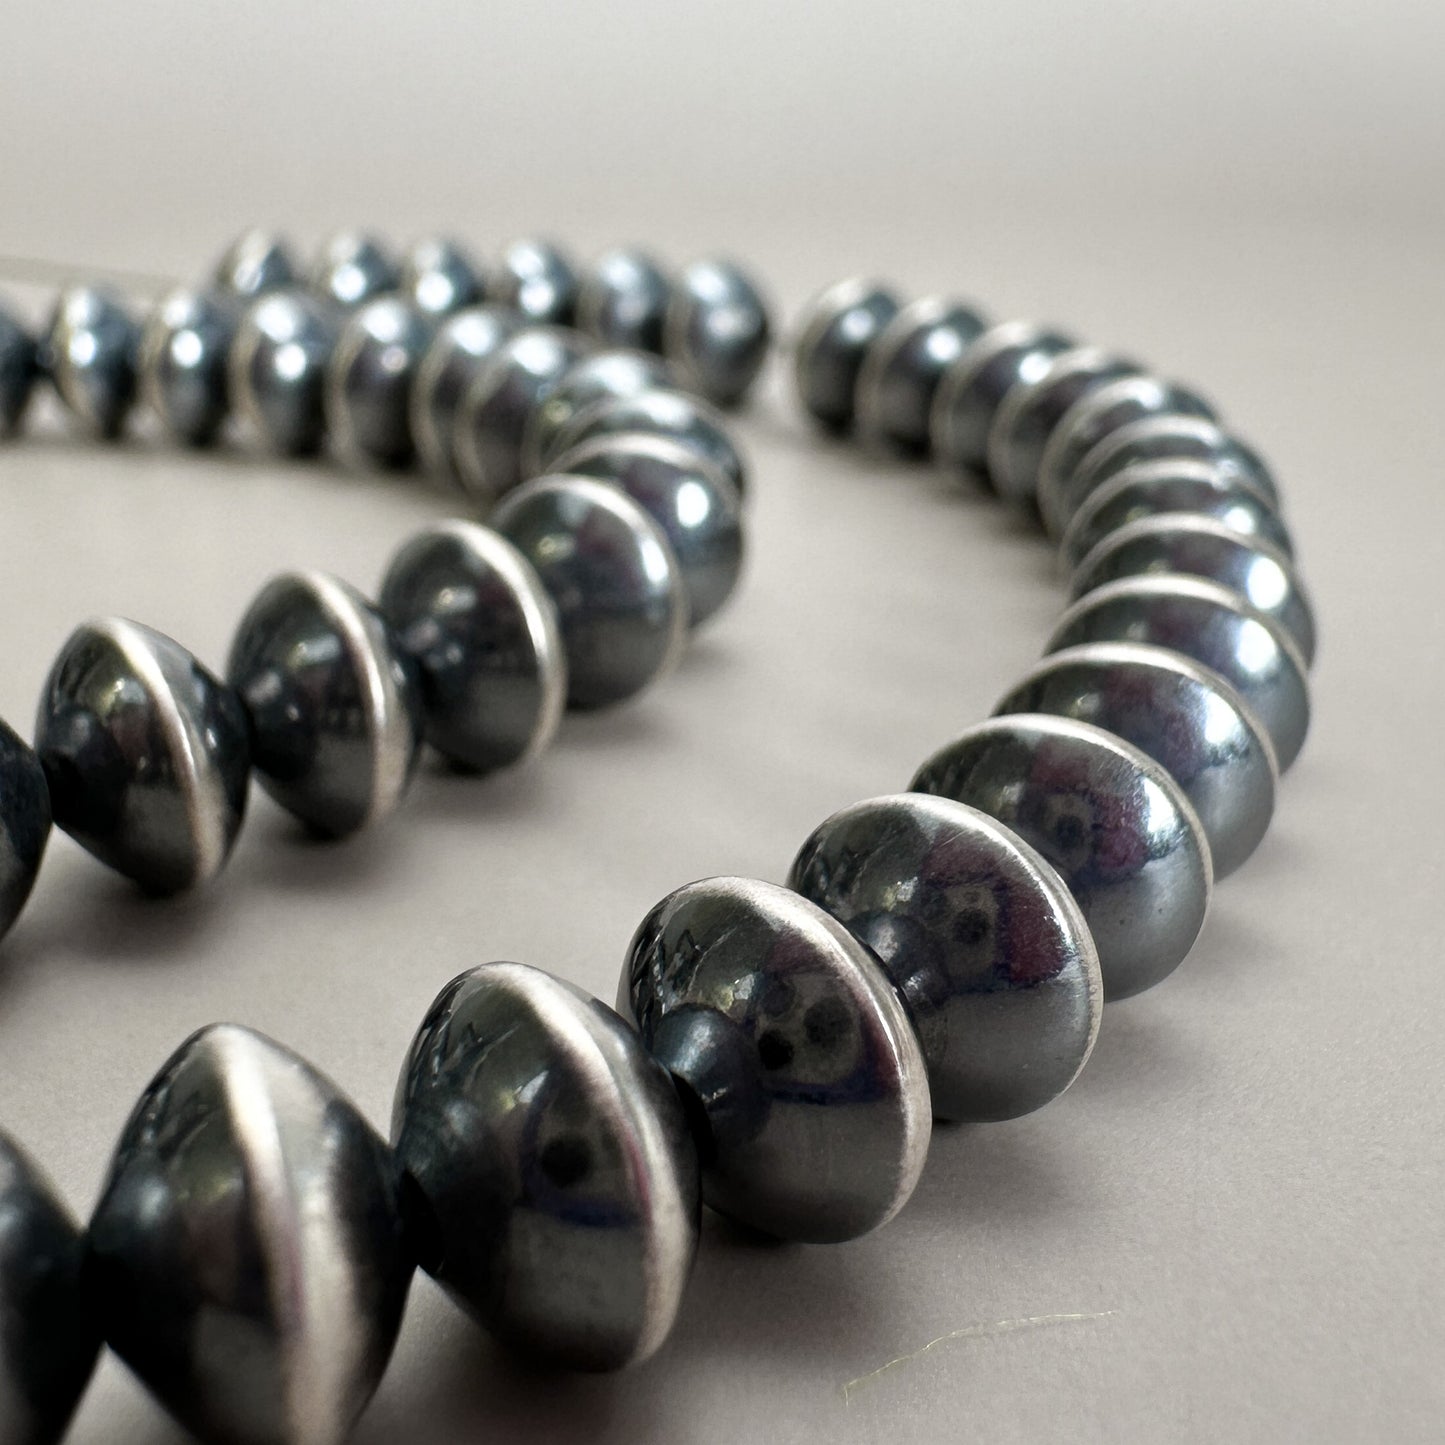 8mm Navajo Smooth Saucer Bead (Oxidized Sterling Silver) - 1 pc. (M1765)